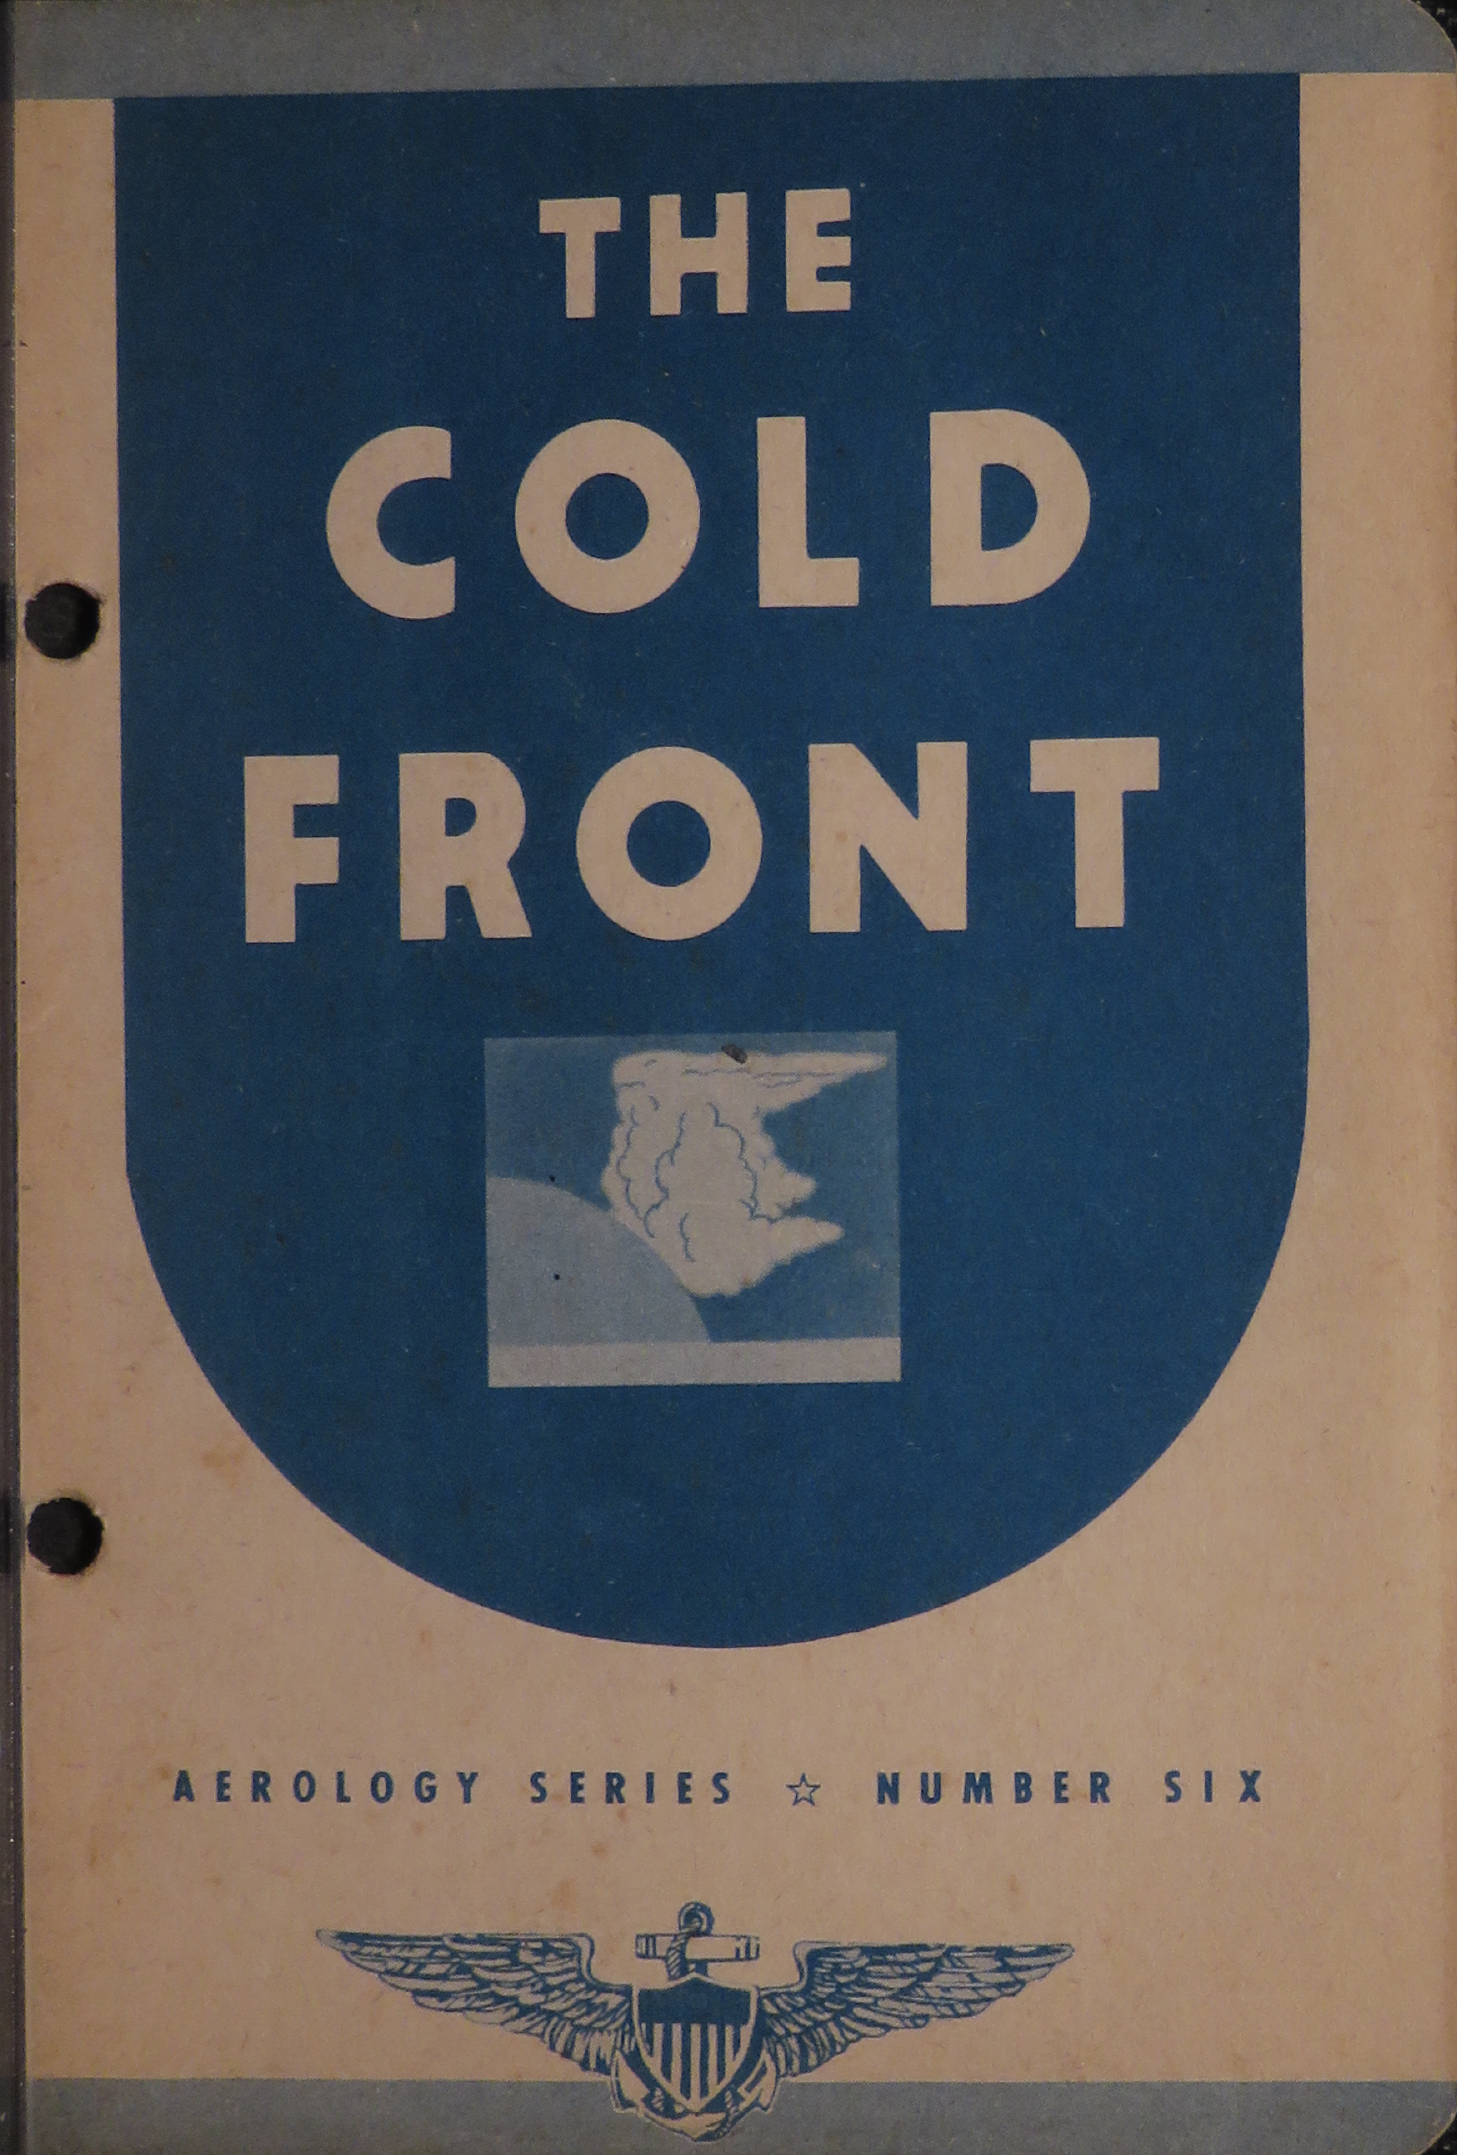 Sample page 1 from AirCorps Library document: Aerology Series No. 6; The Cold Front